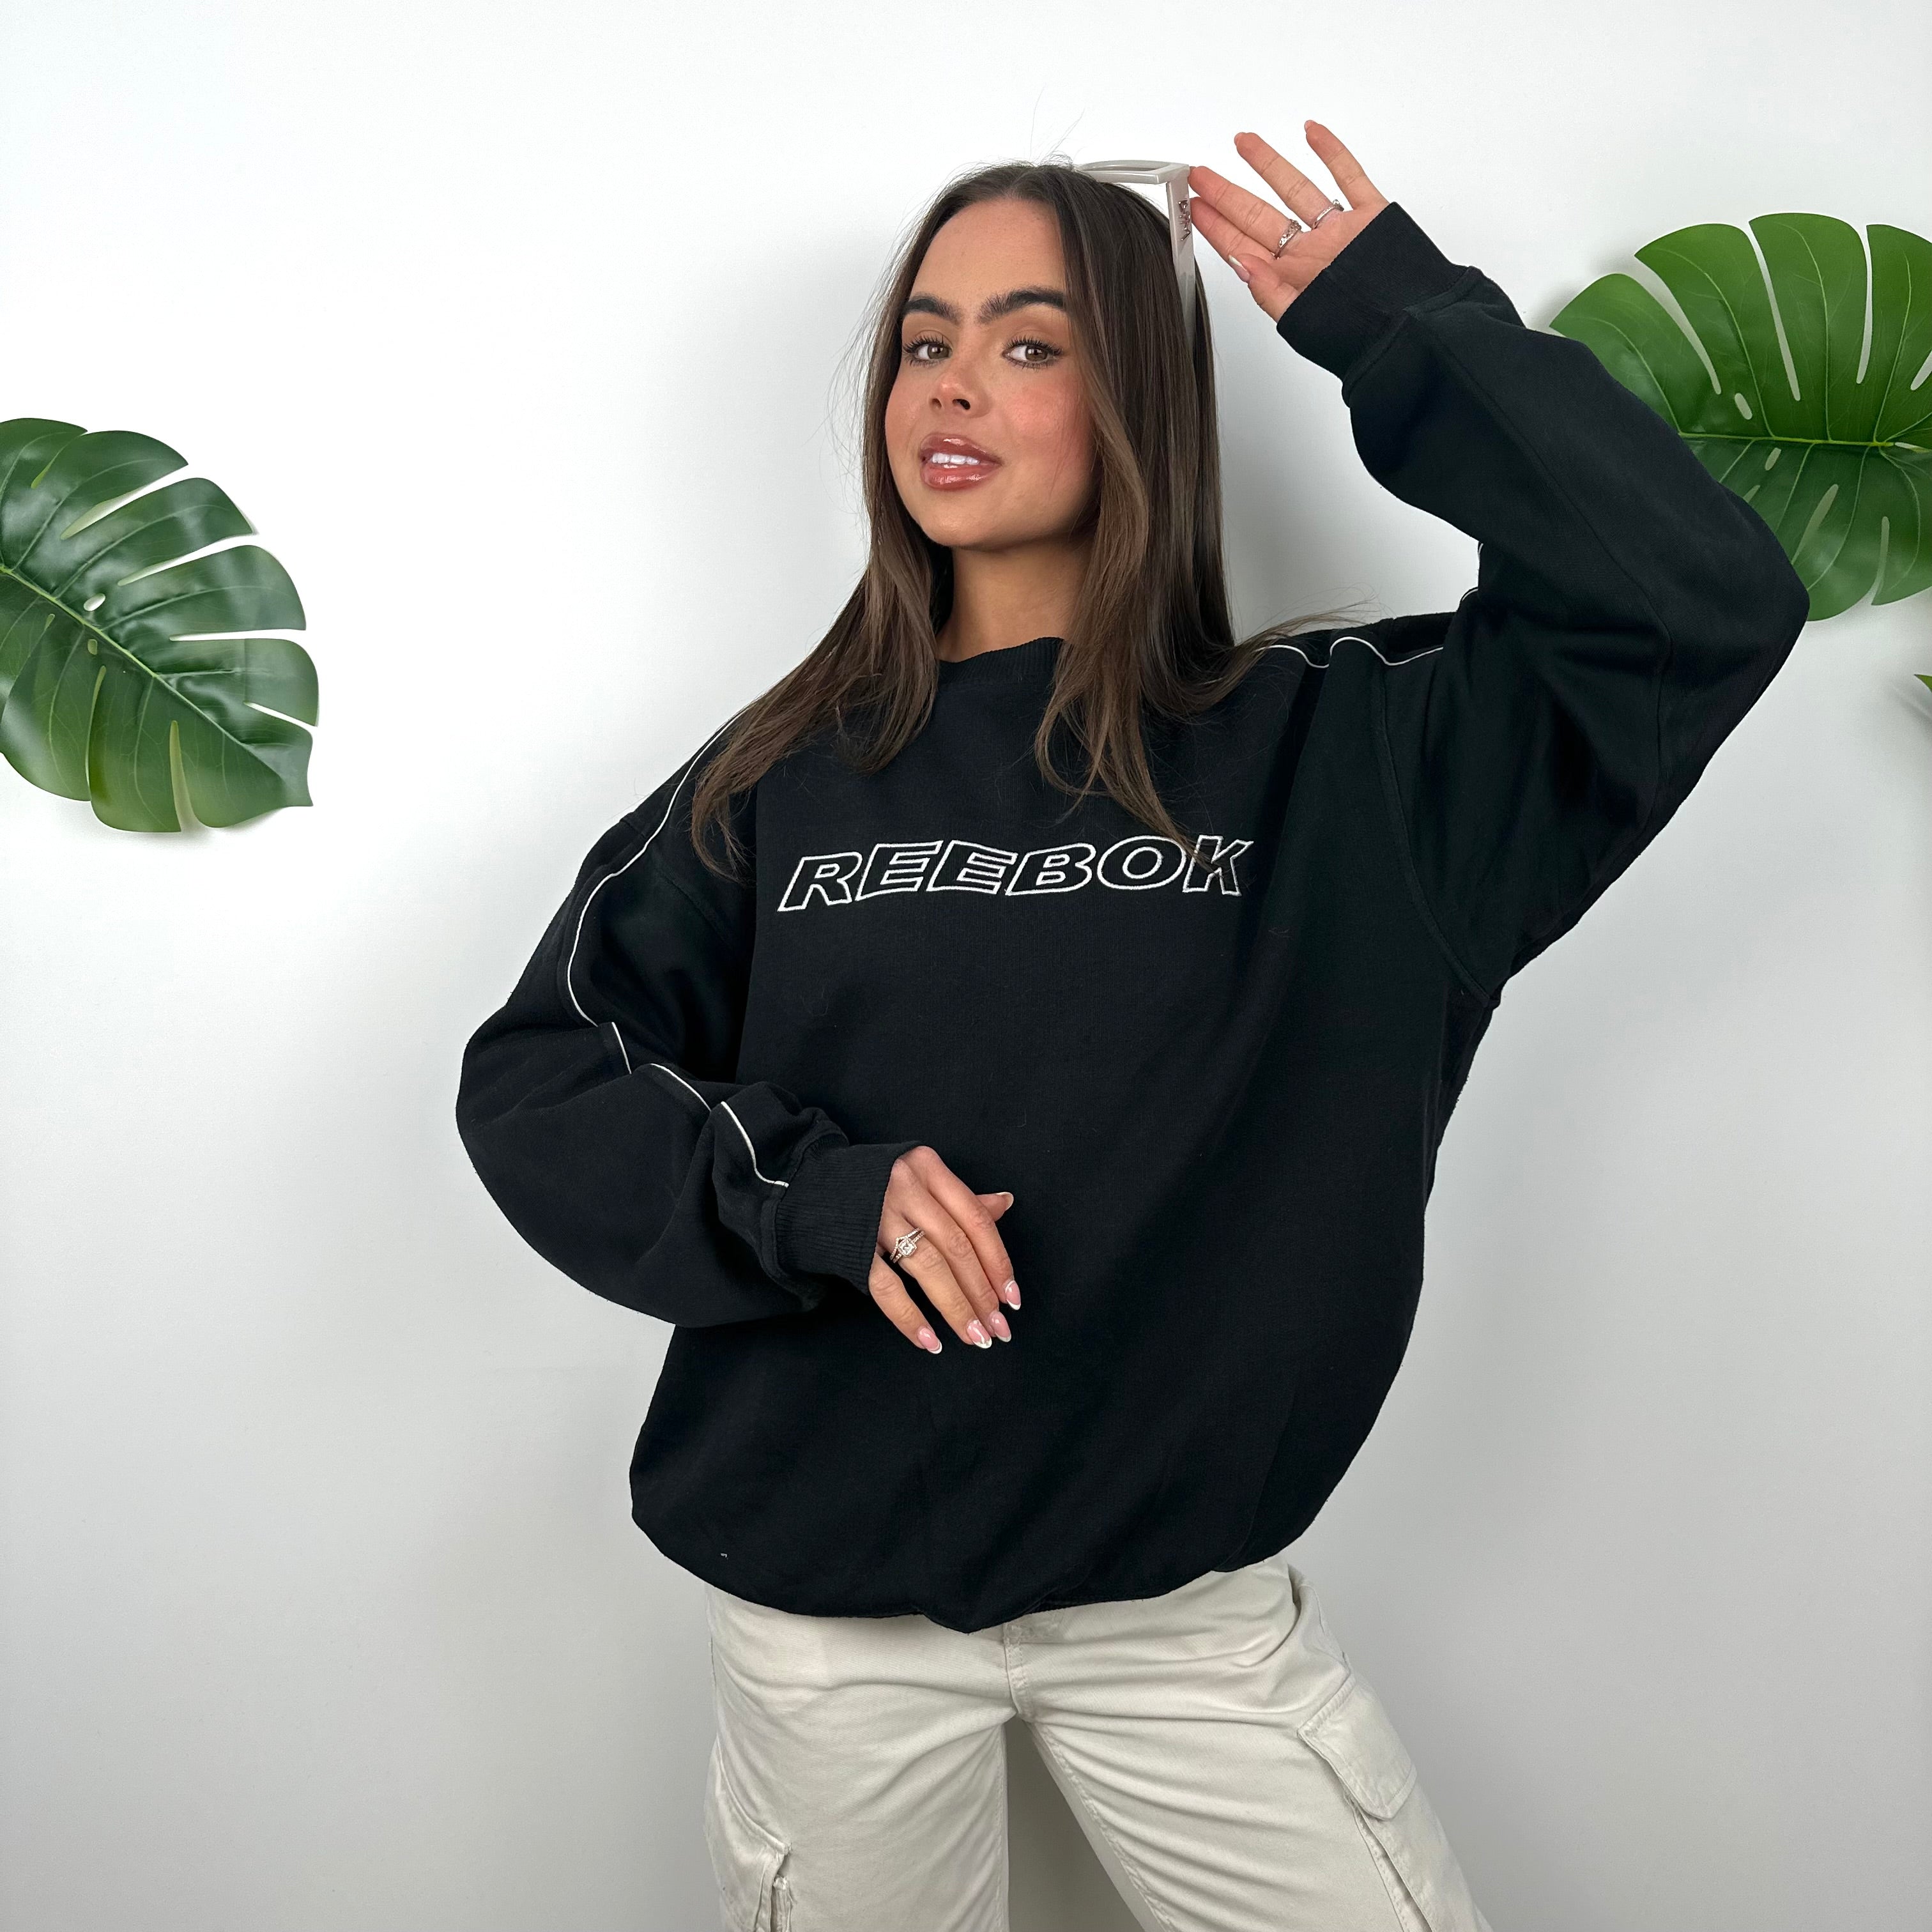 Reebok Black Embroidered Spell Out Sweatshirt (M)